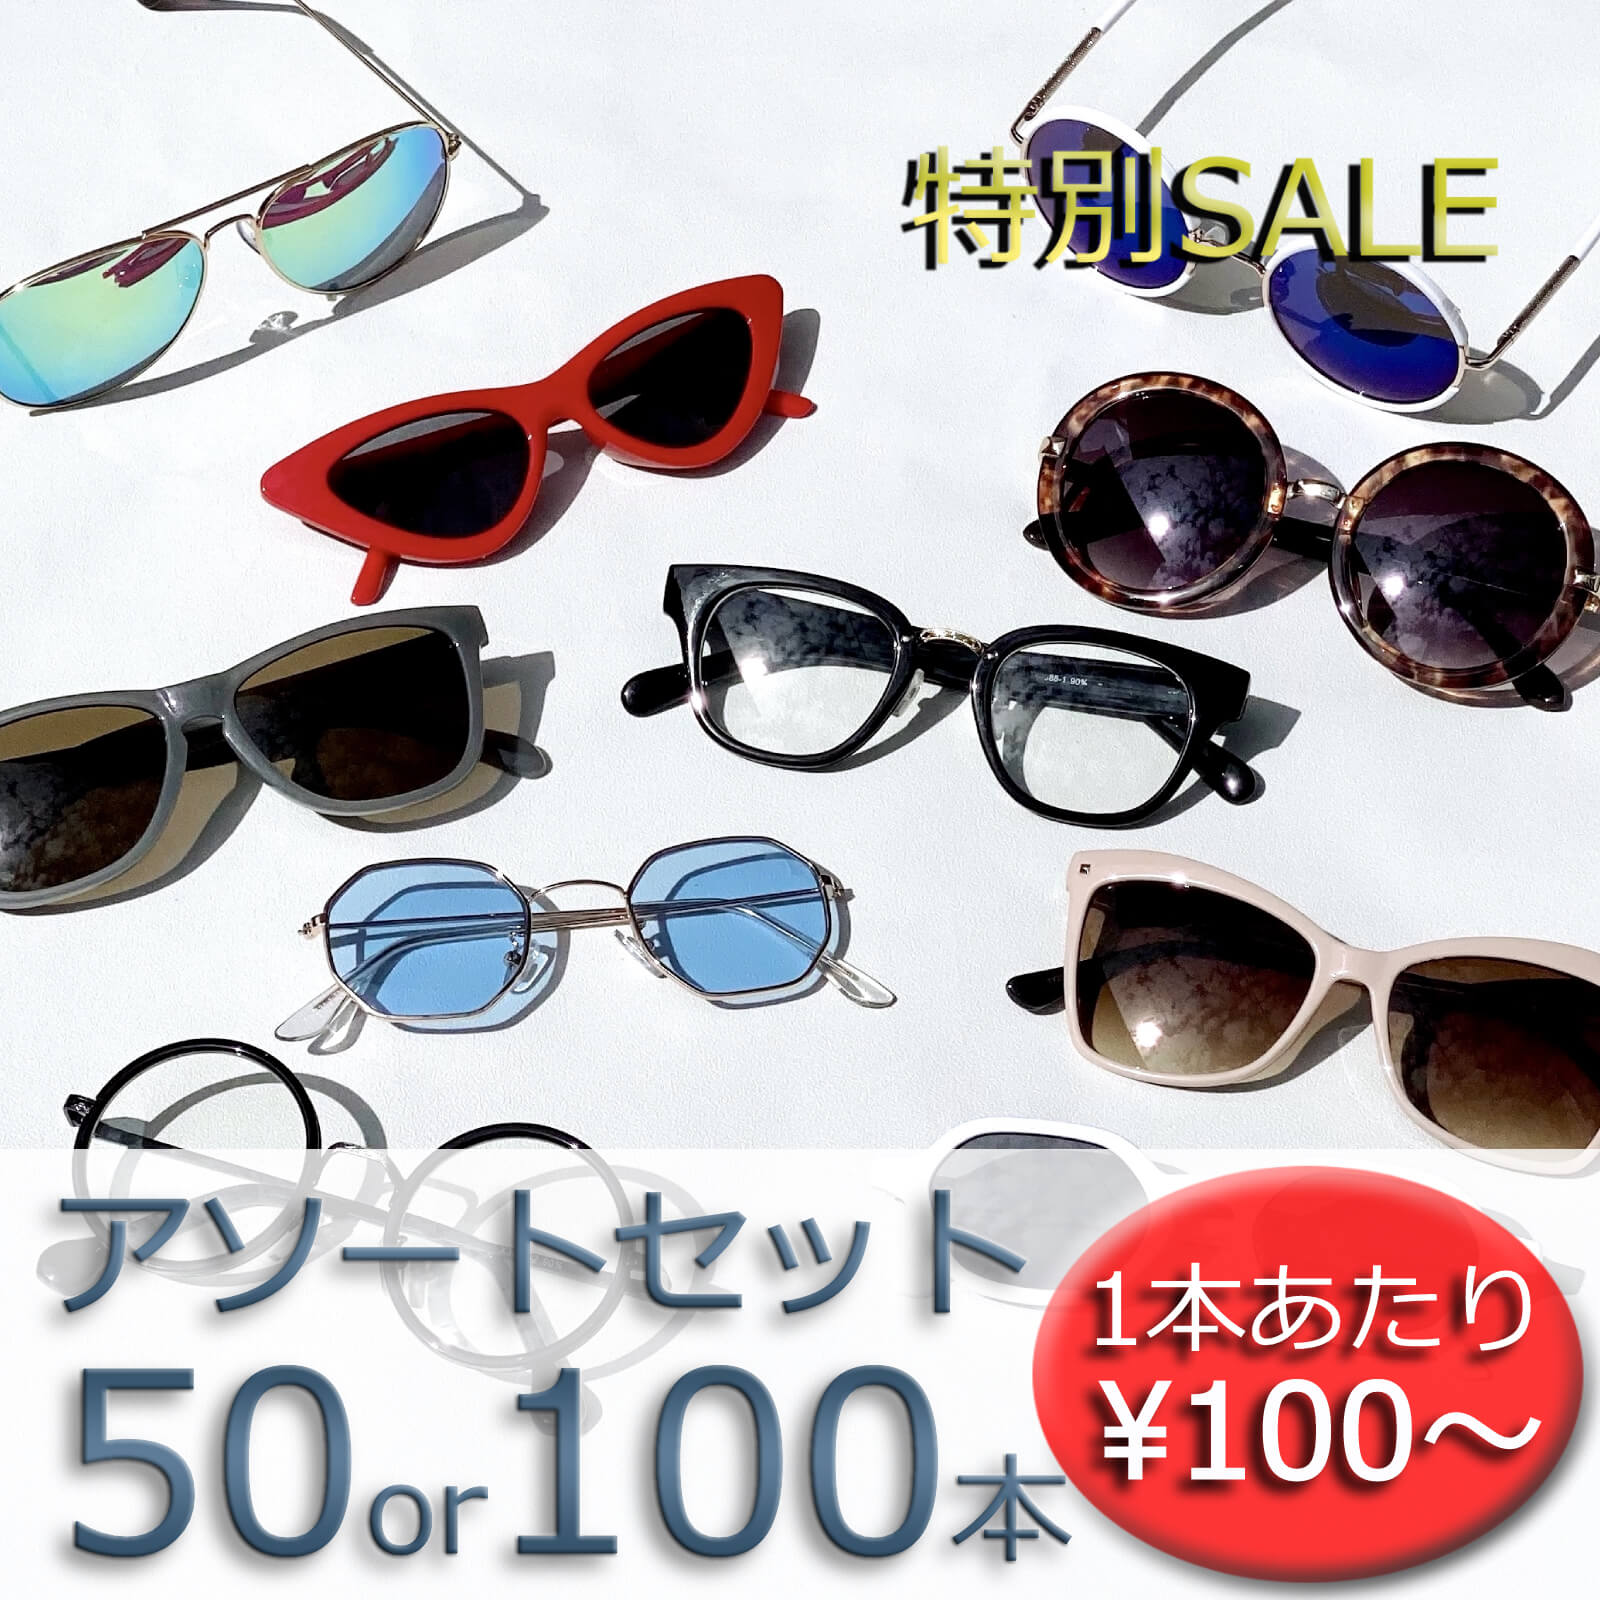 【SALE!!】 100本or50本まとめ買い！ 大特価アソートセット!!　サングラス 伊達メガネ アウトレット セール